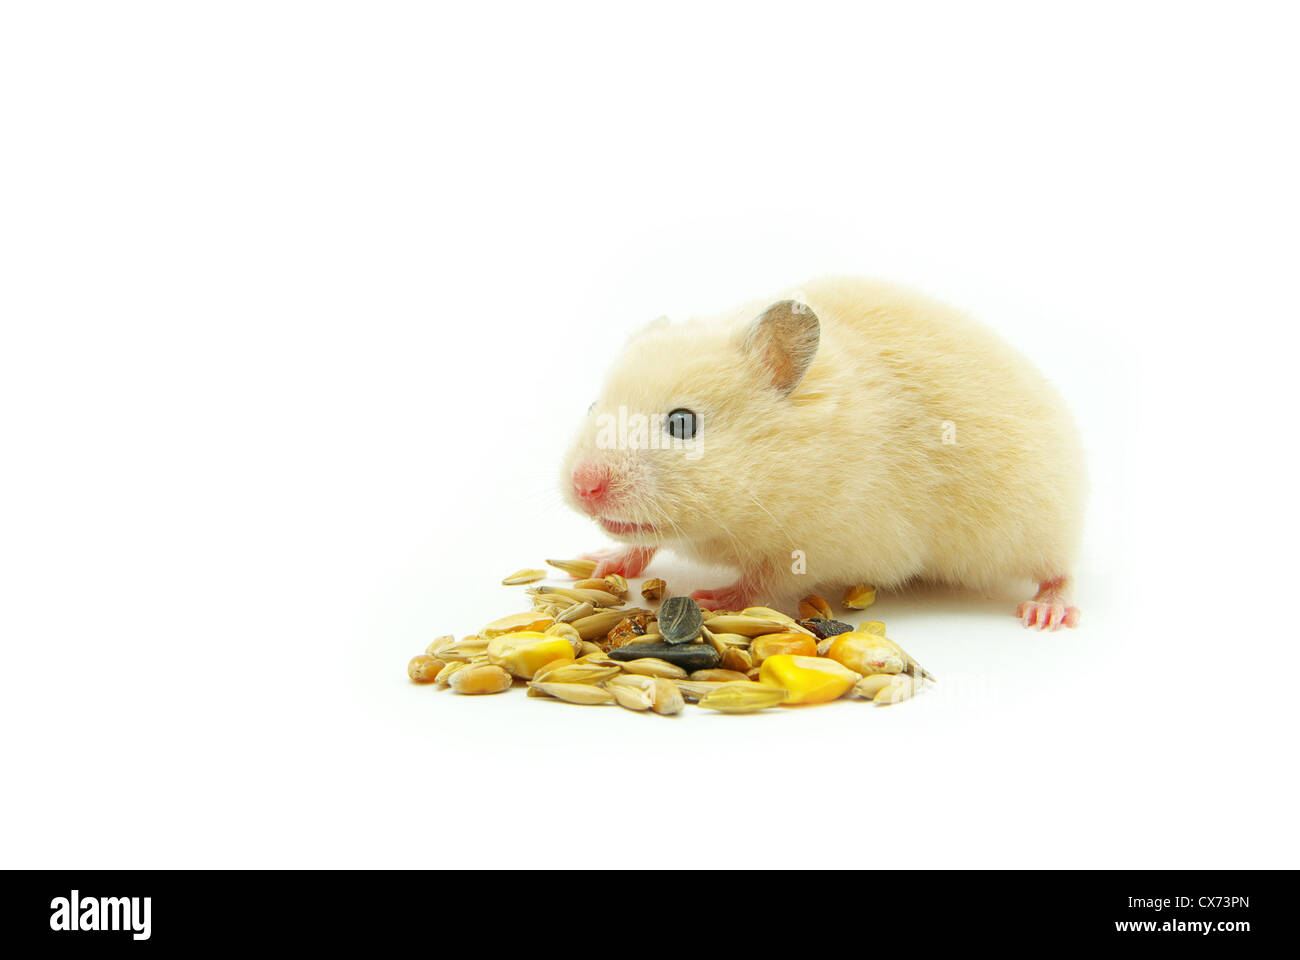 Hamster in front of a white background Stock Photo